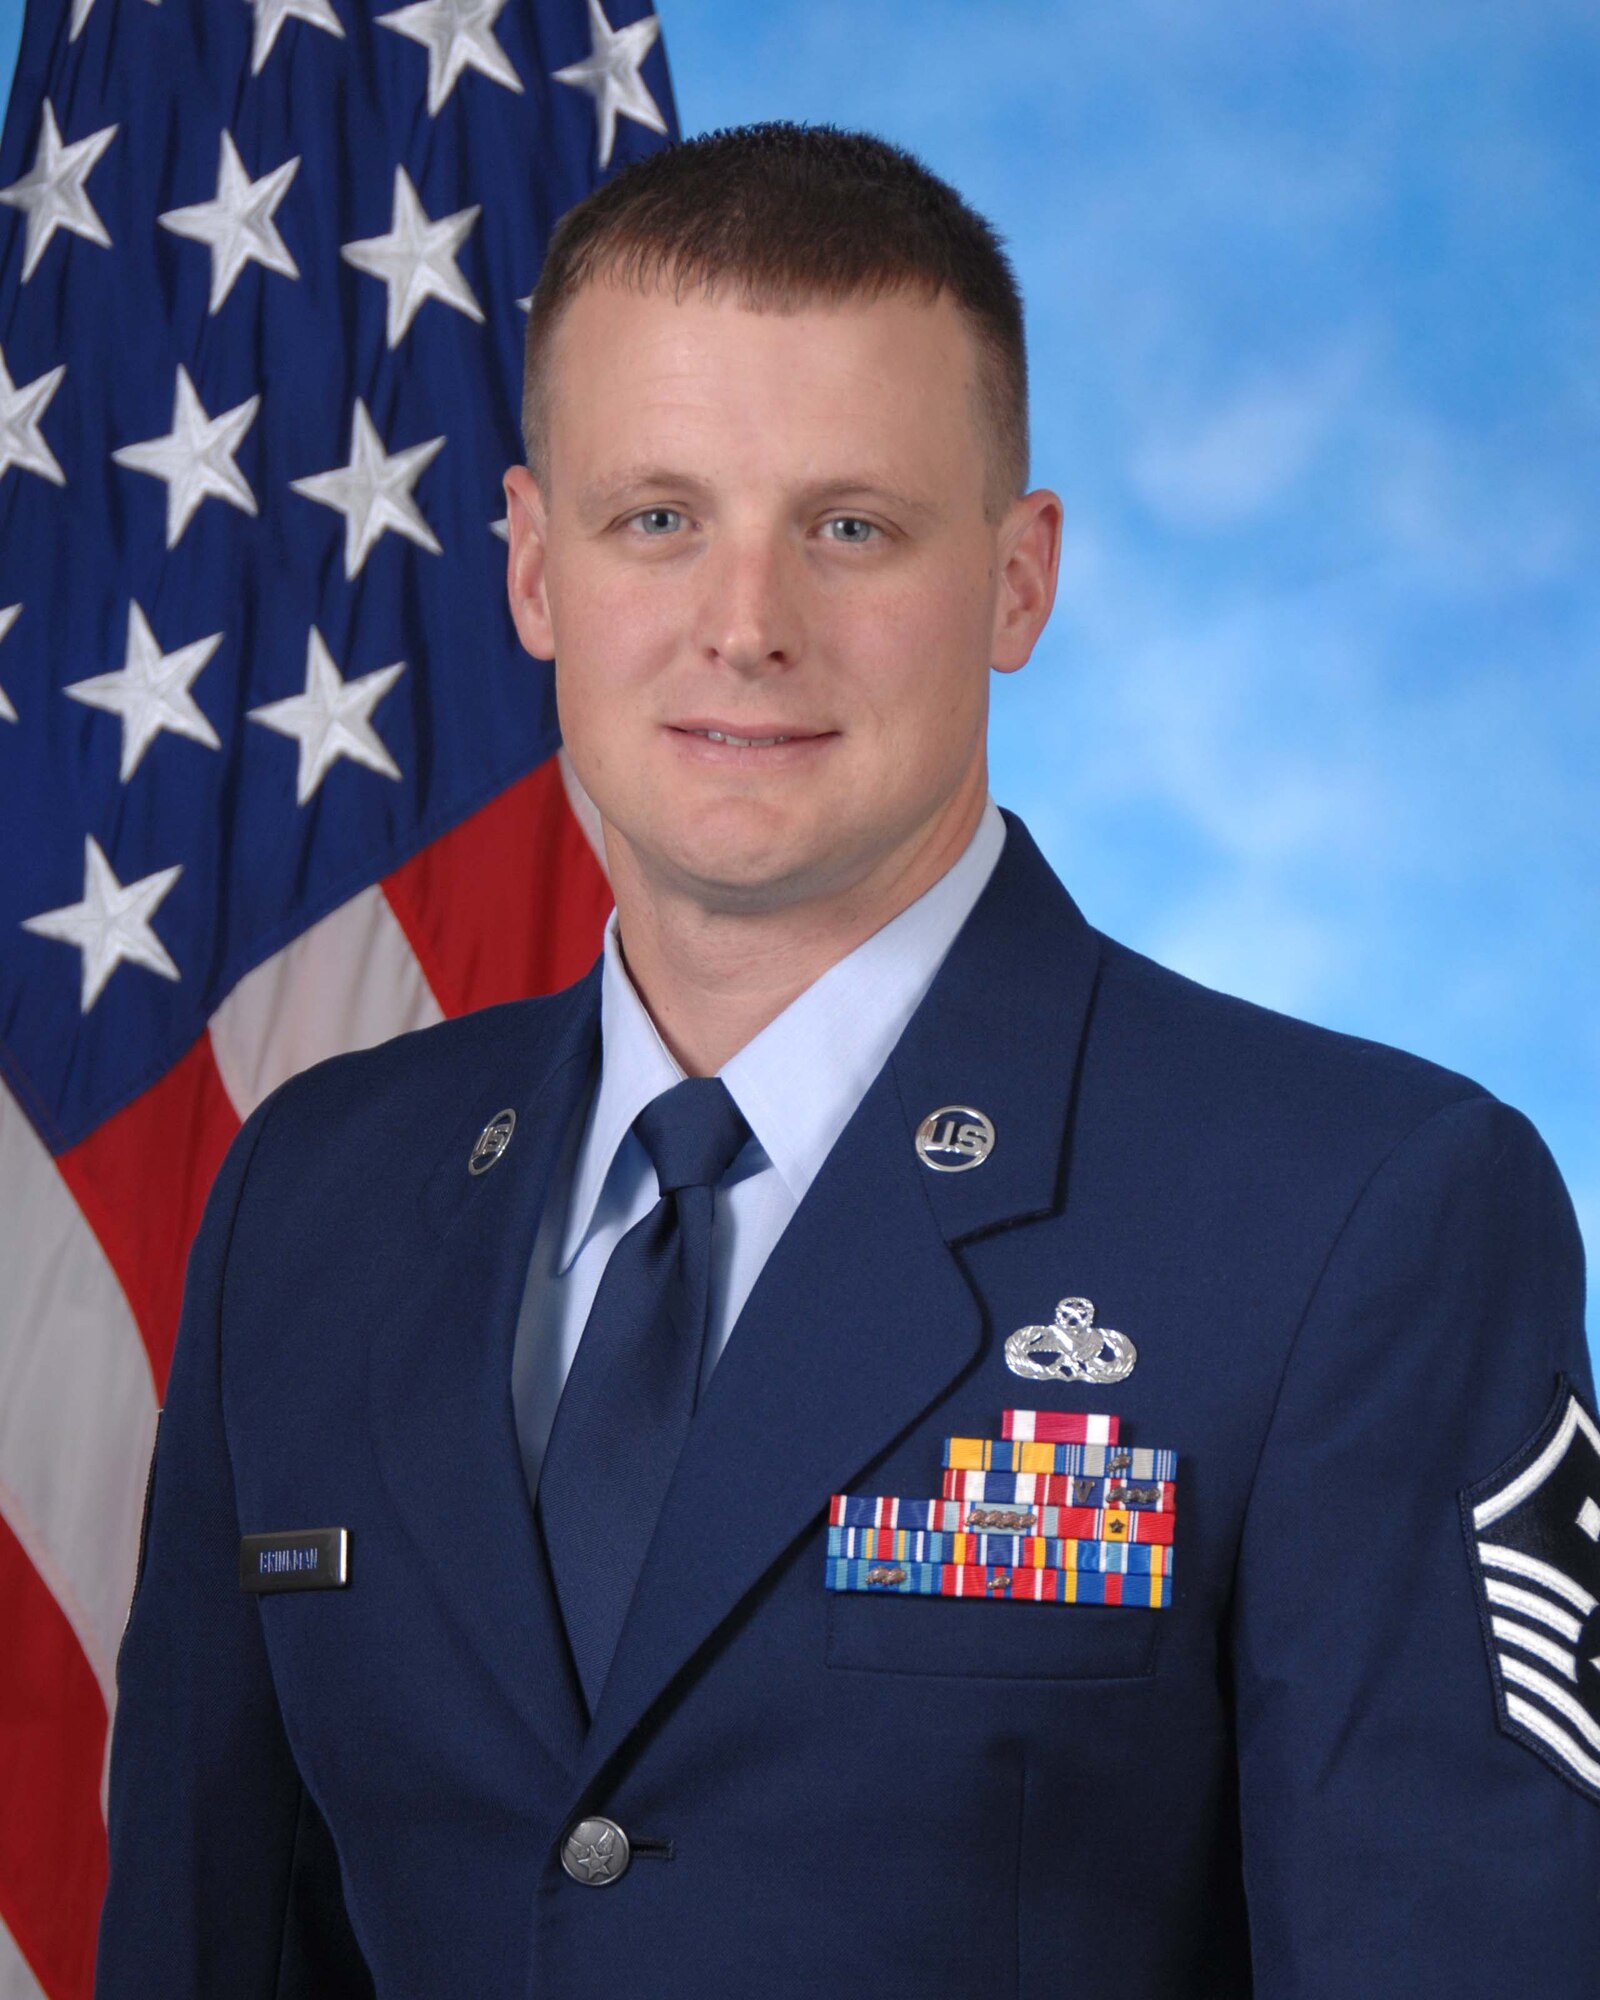 OFFUTT AIR FORCE BASE, Neb. -- Master Sgt. Robert W. Brinkman, from Offutt AFB, Neb., is one of 29 Airmen nominated for awards who will attend the 2010 Air Combat Command Outstanding Airmen of the Year Awards Banquet in Omaha, Neb., April 21. Sergeant Brinkman is nominated for the First Sergeant of the Year Award. U.S. Air Force courtesy photo